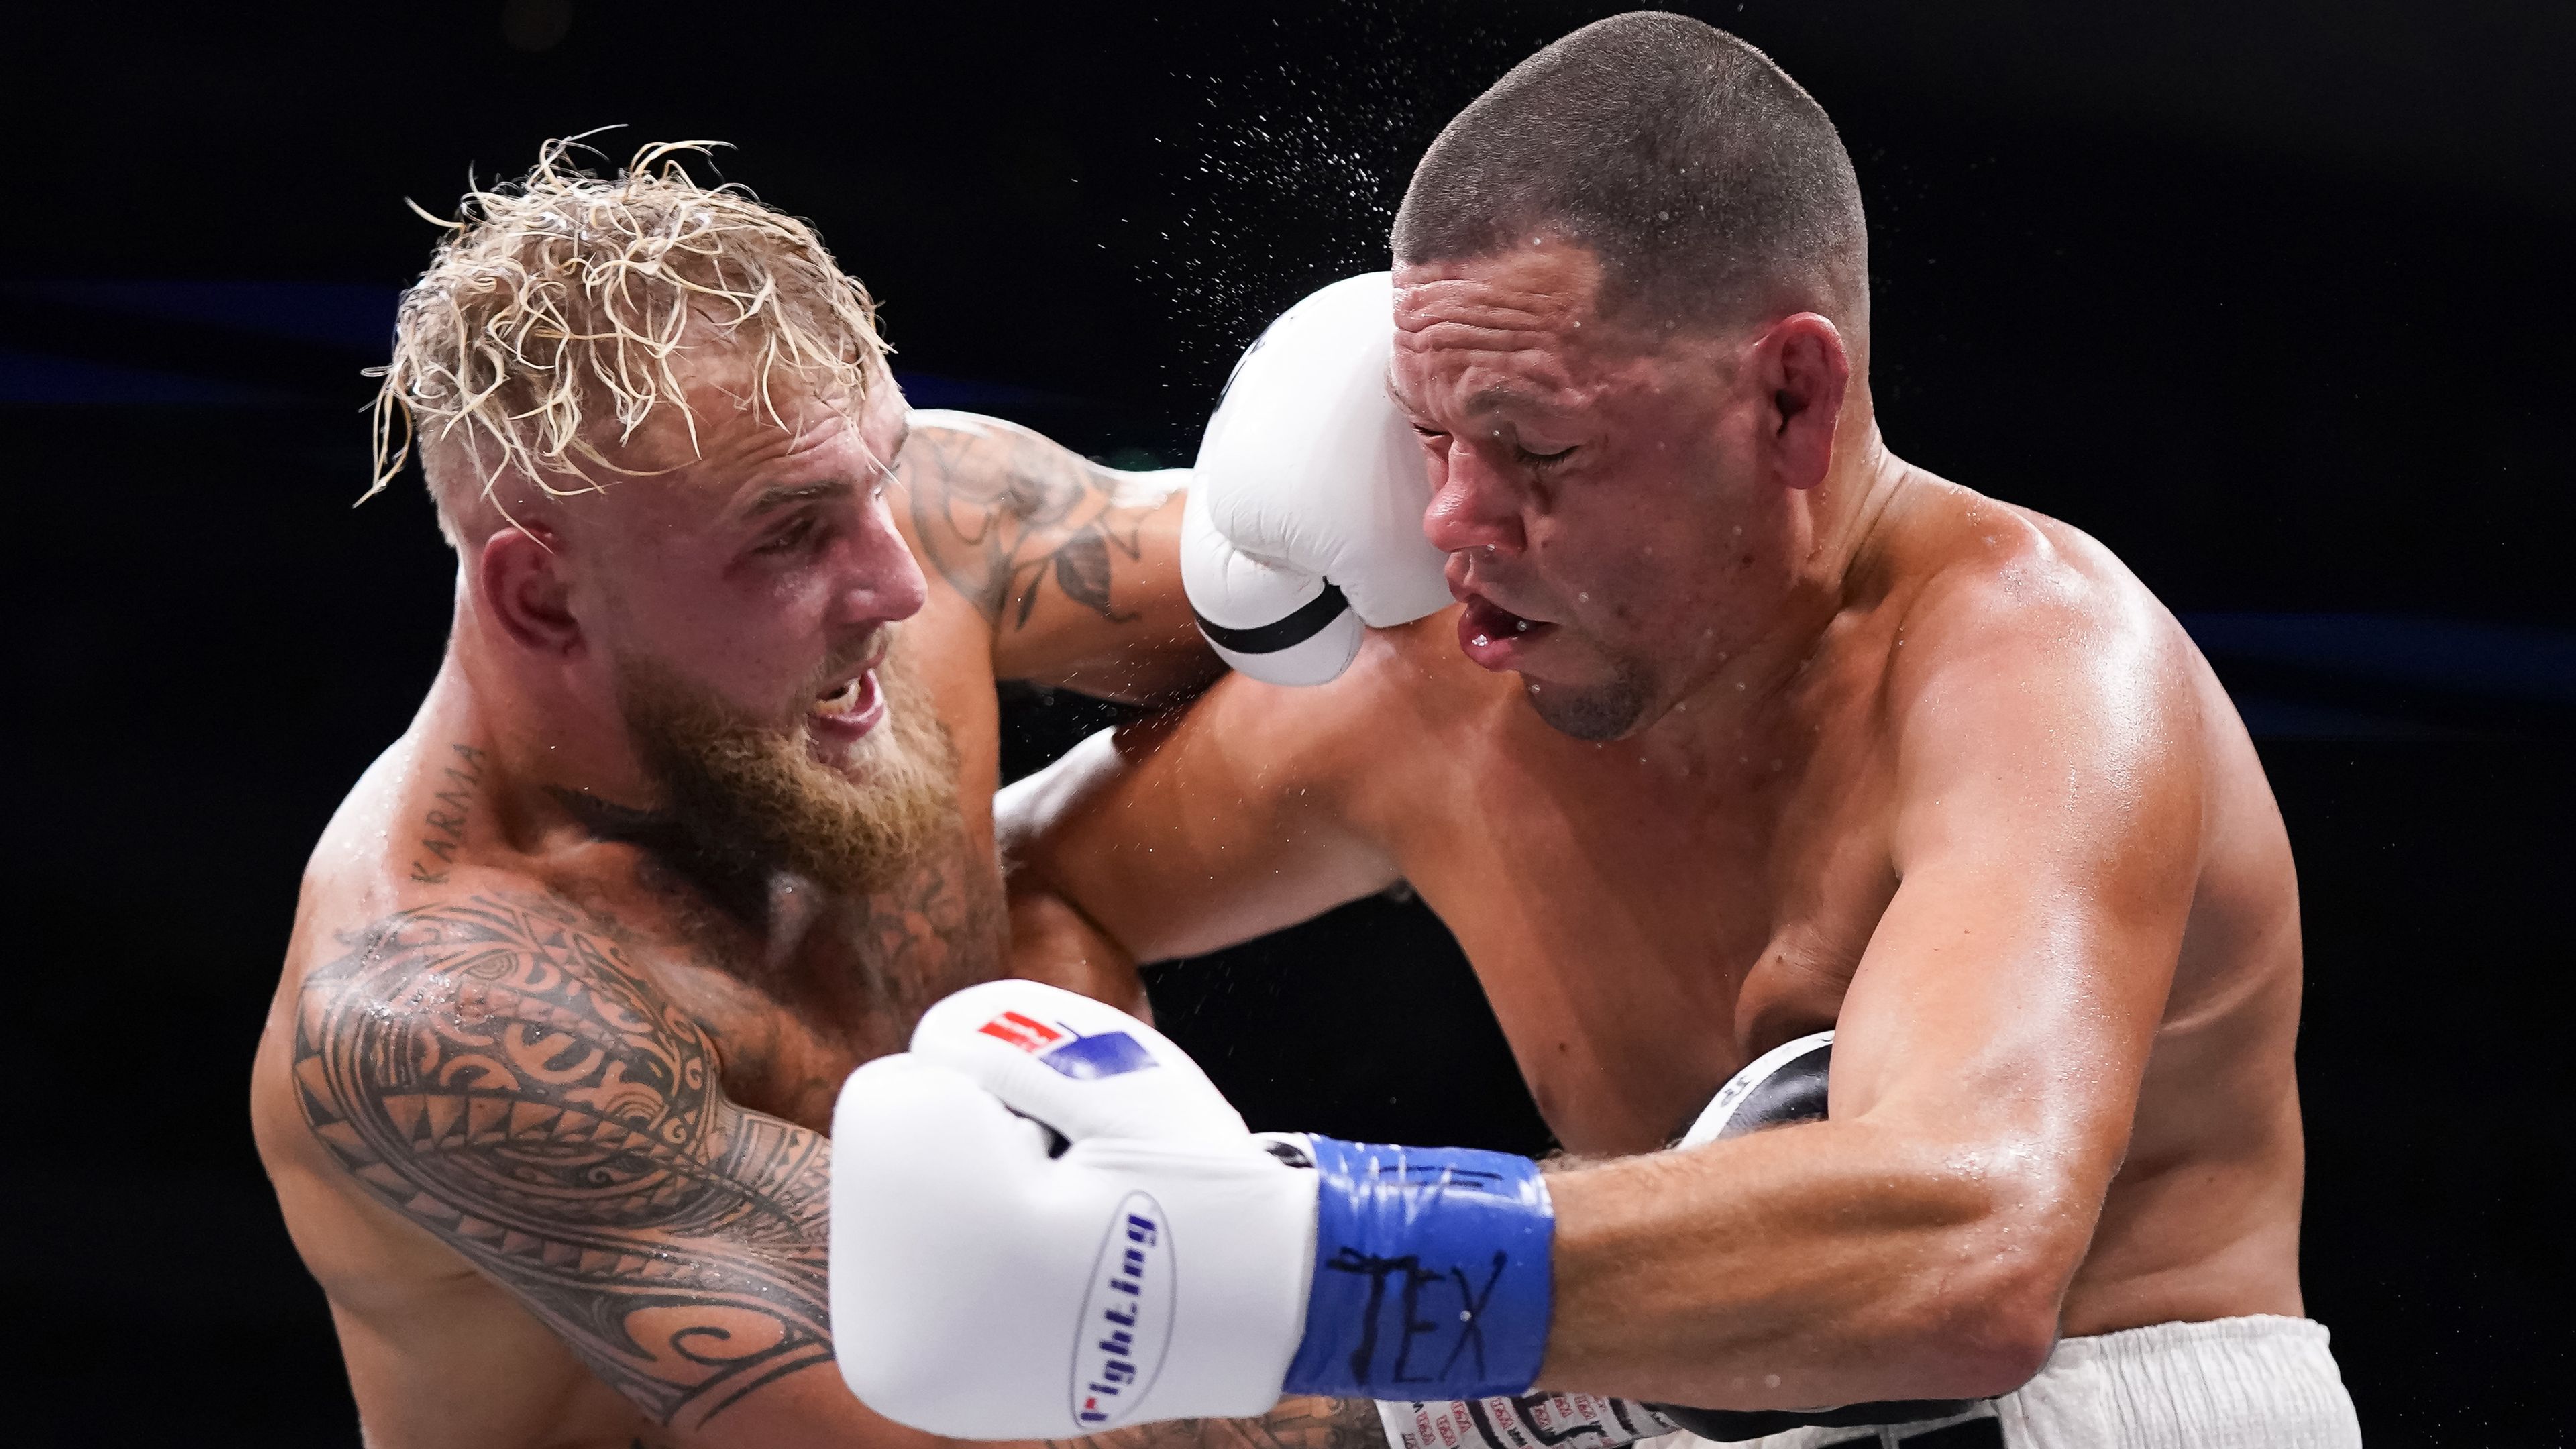 Jake Paul calls for Octagon rematch with Nate Diaz after unanimous decision win